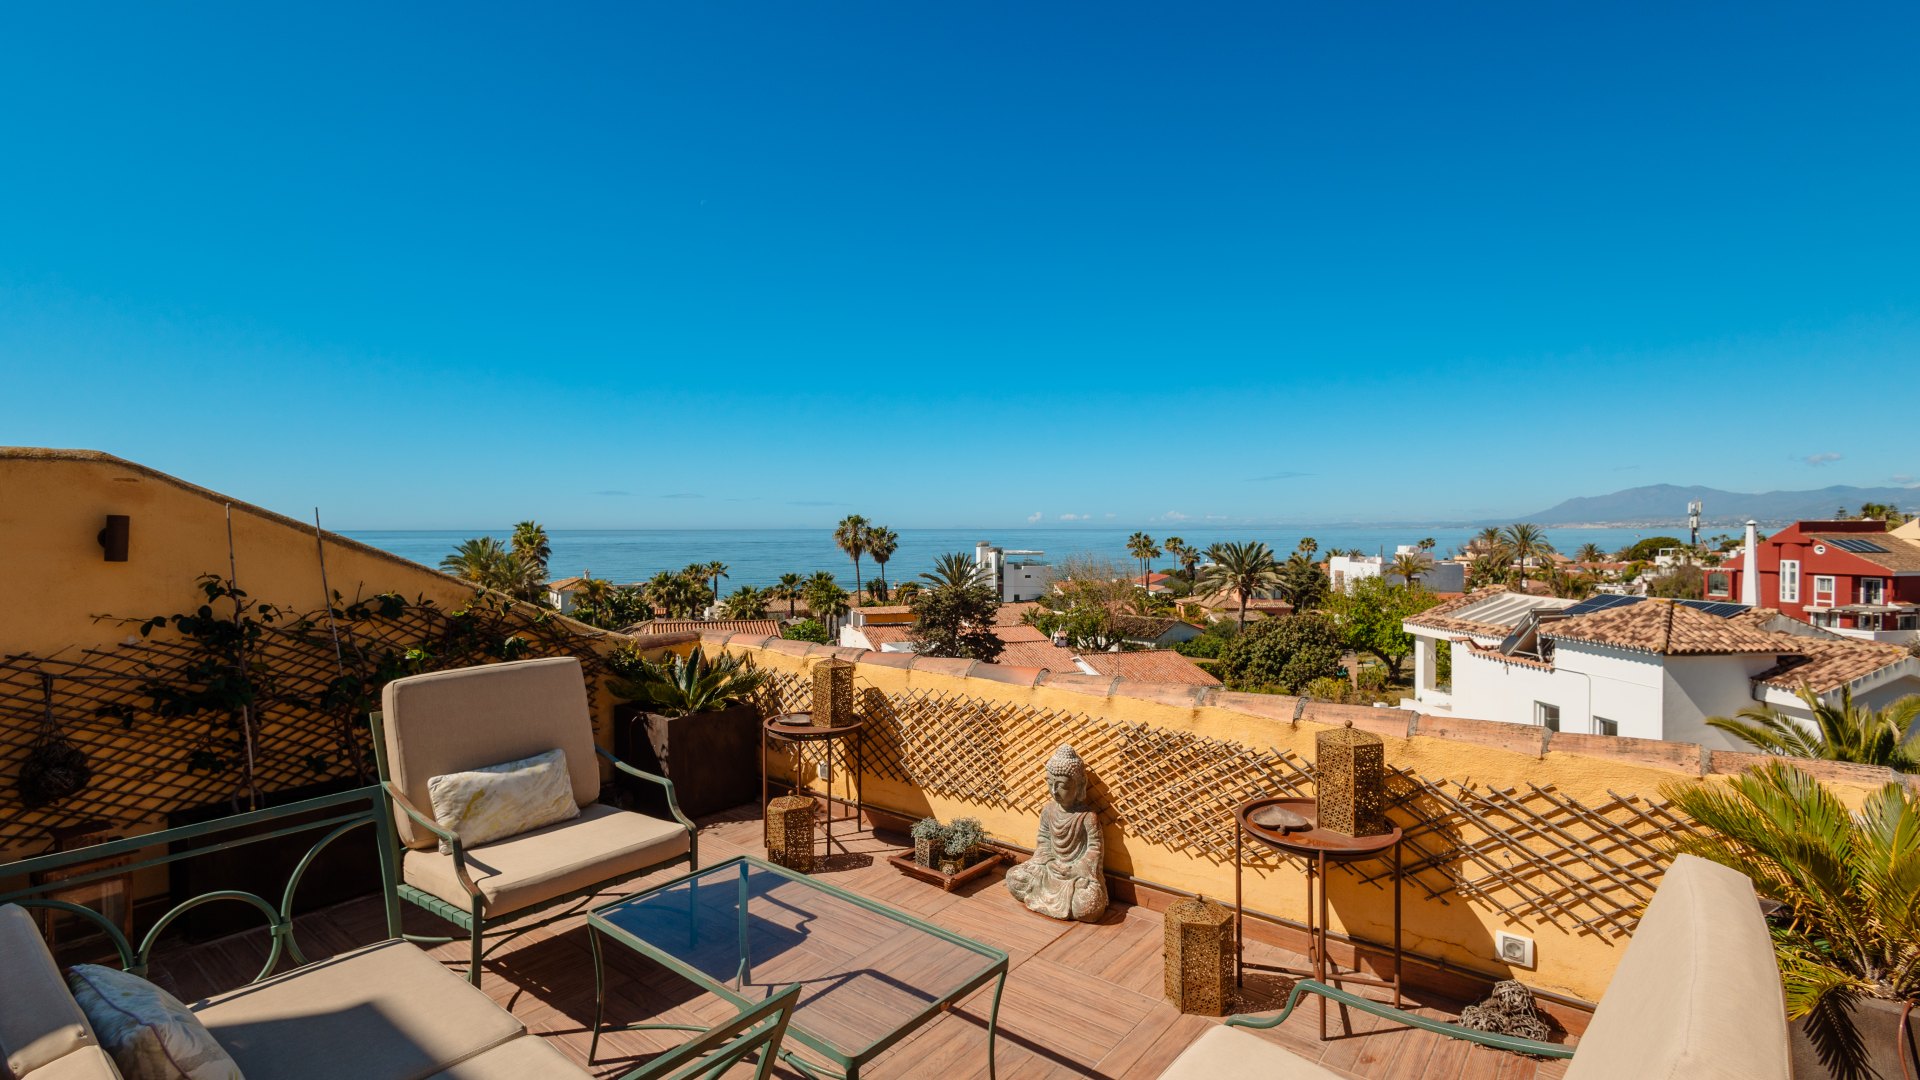 Duplex apartment with 3 bedrooms and 2 bathrooms in Costabella, Marbella